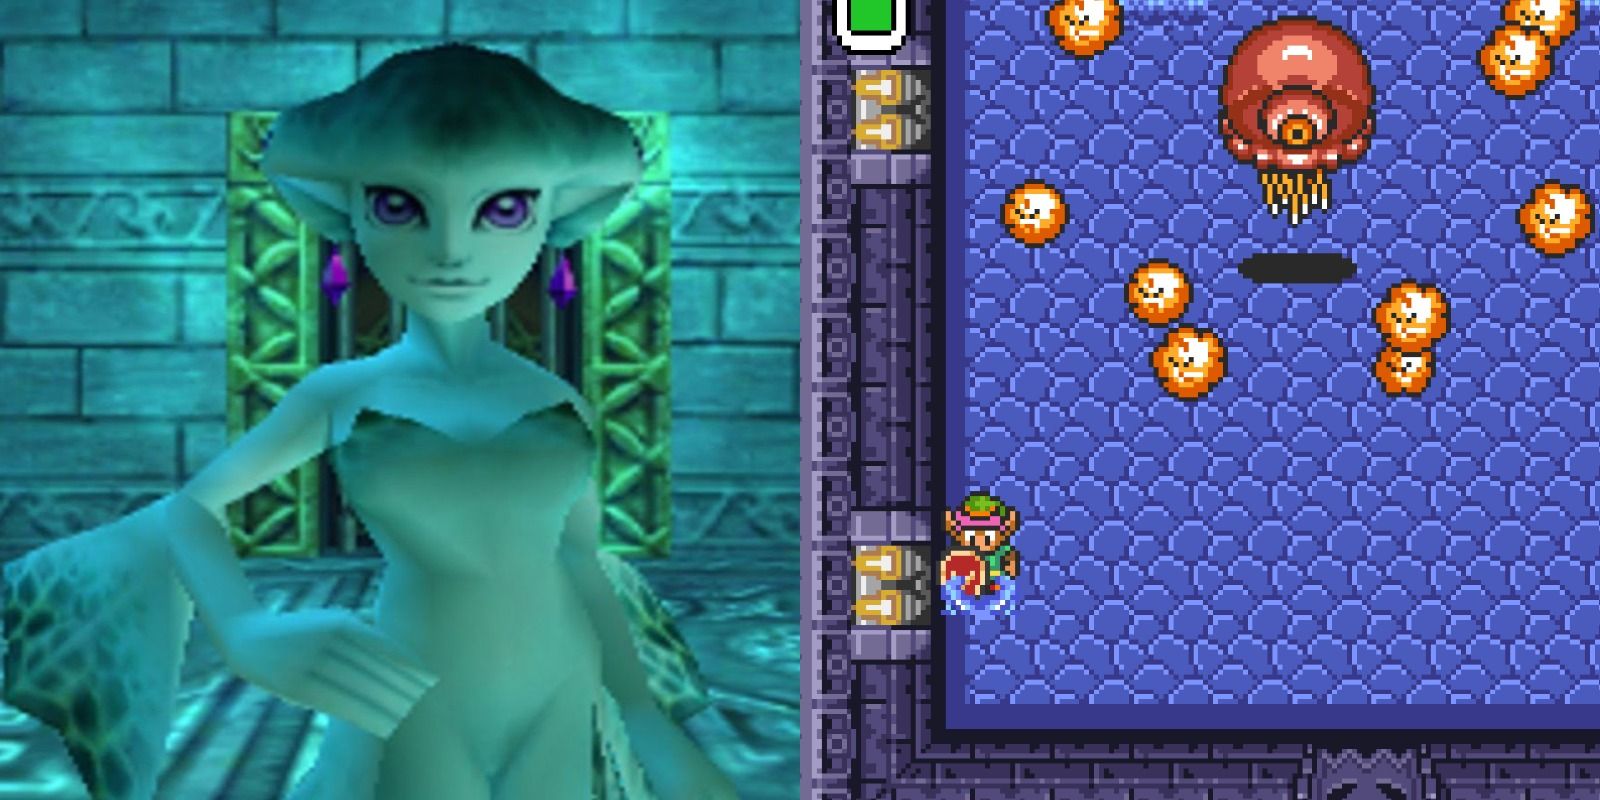 An image of a water demon and the player swimming through the water in The Legend Of Zelda games